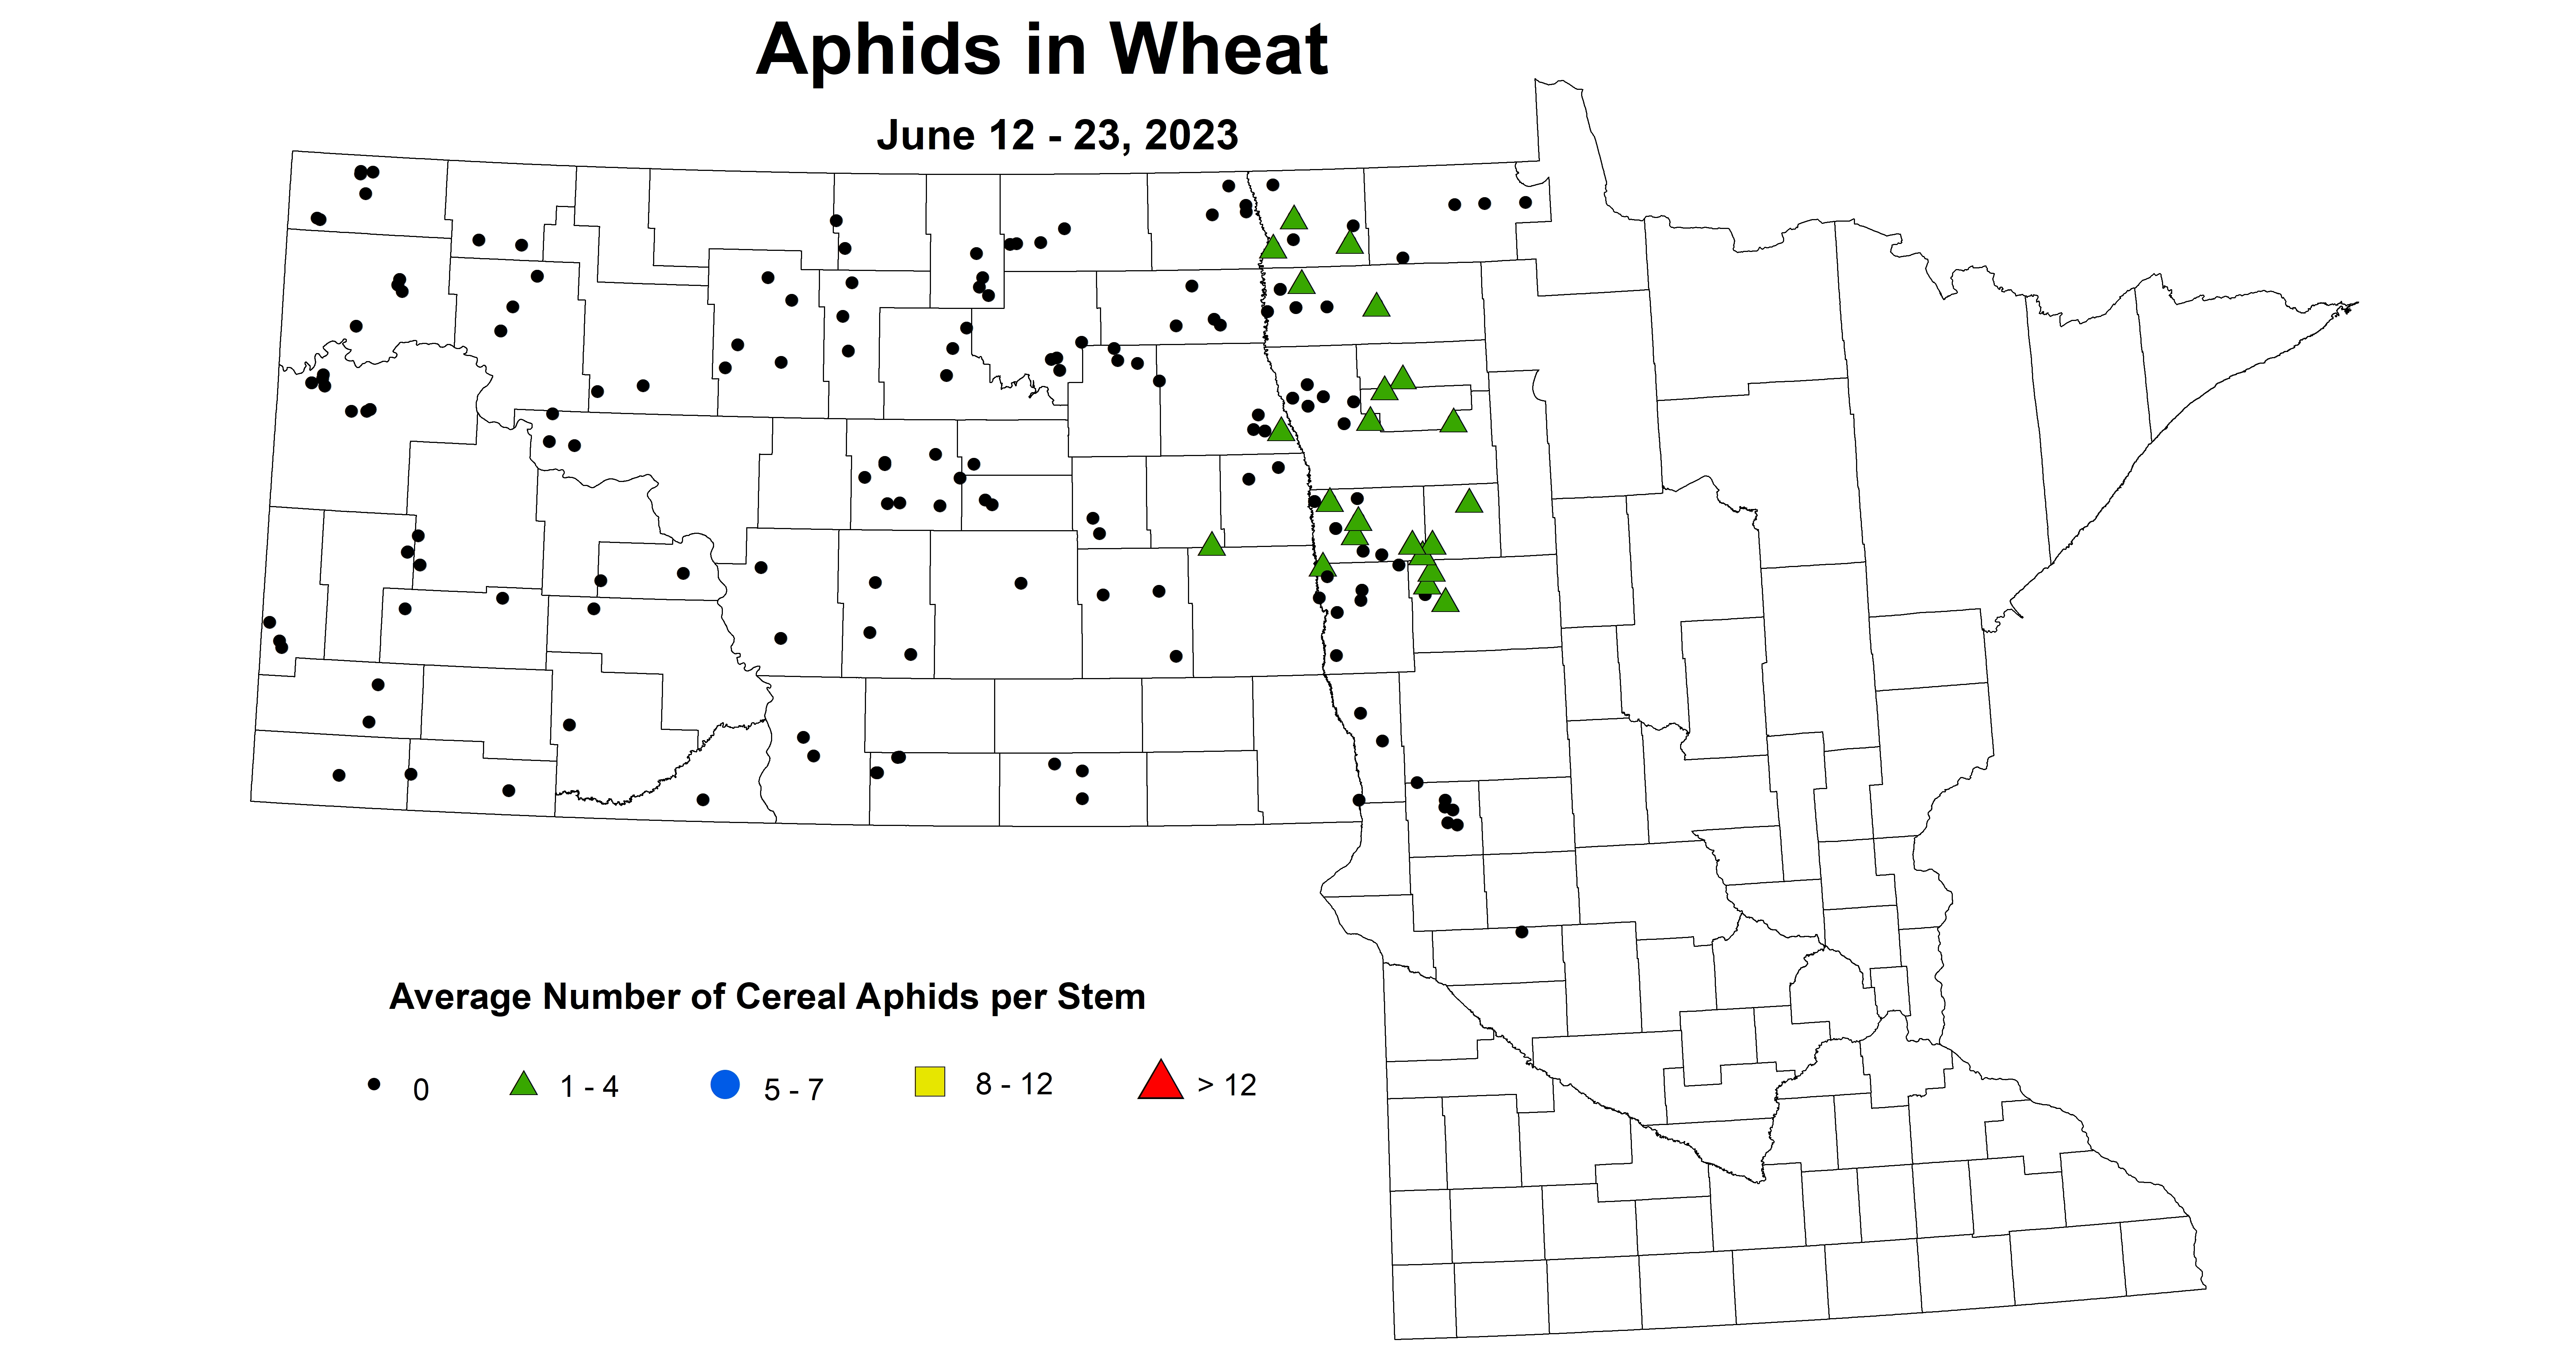 wheat average number of aphids June 12-23 2023 updated